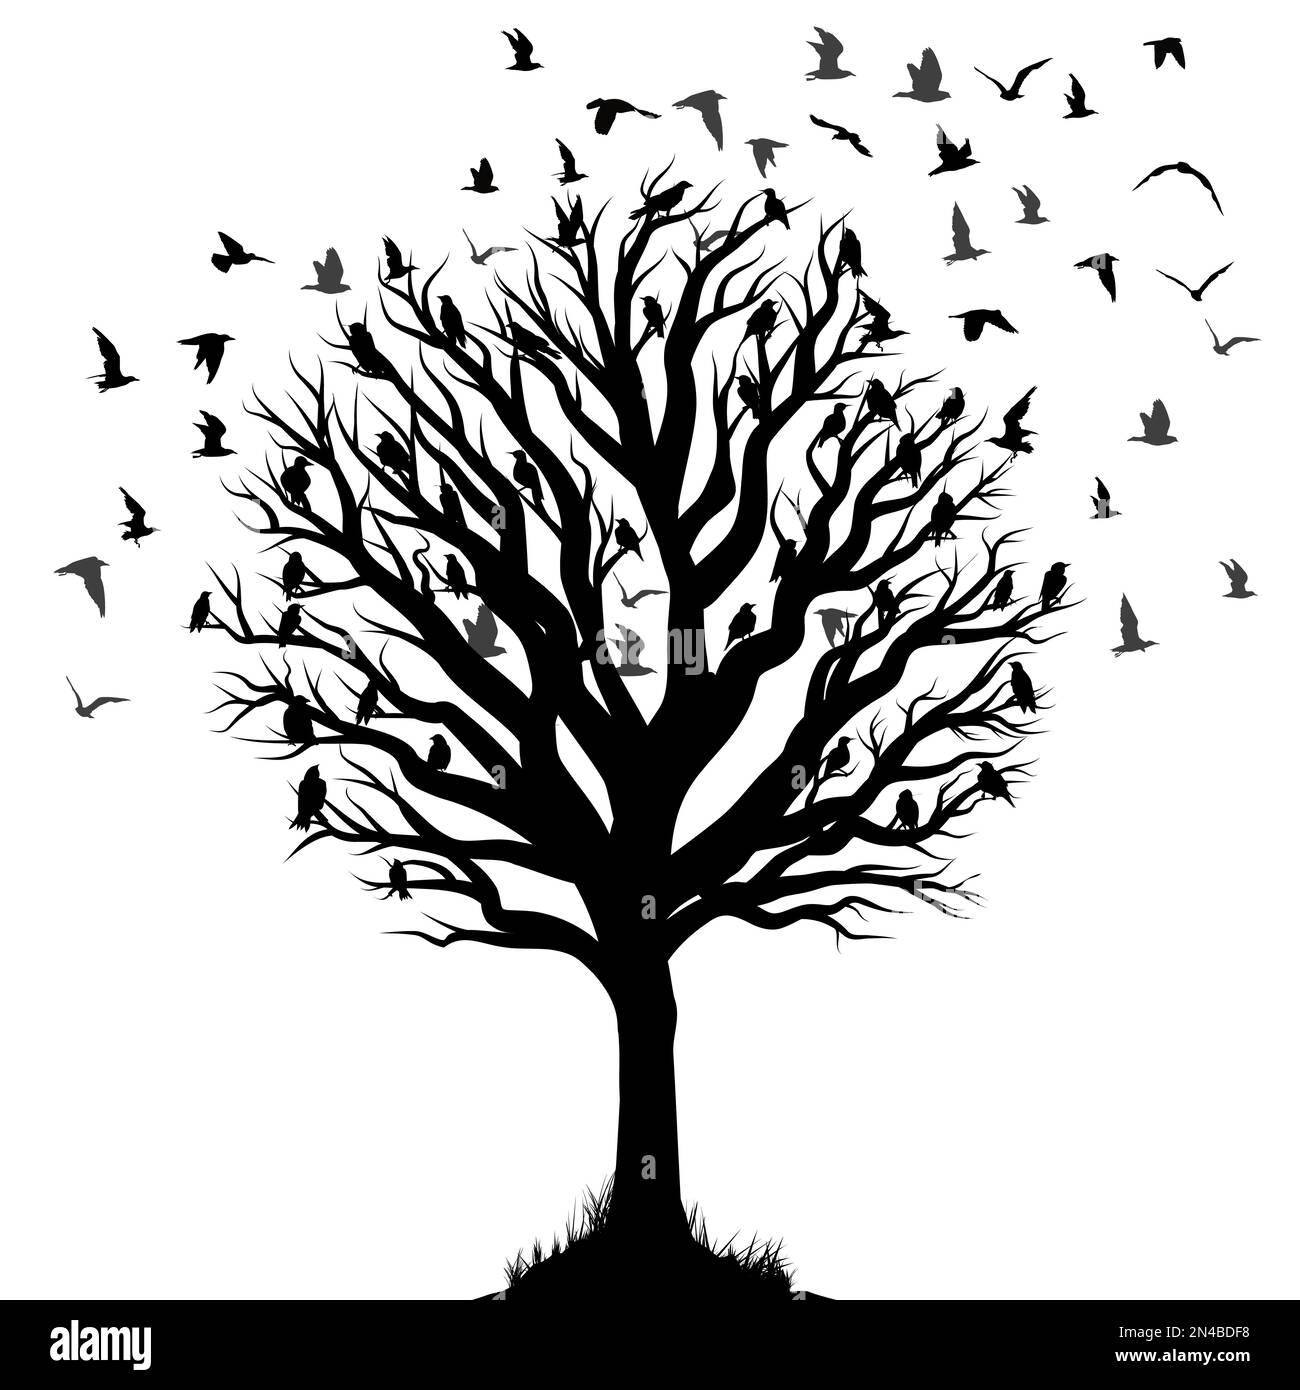 Abstract tree silhouette with flock of birds flying Stock Vector Image ...